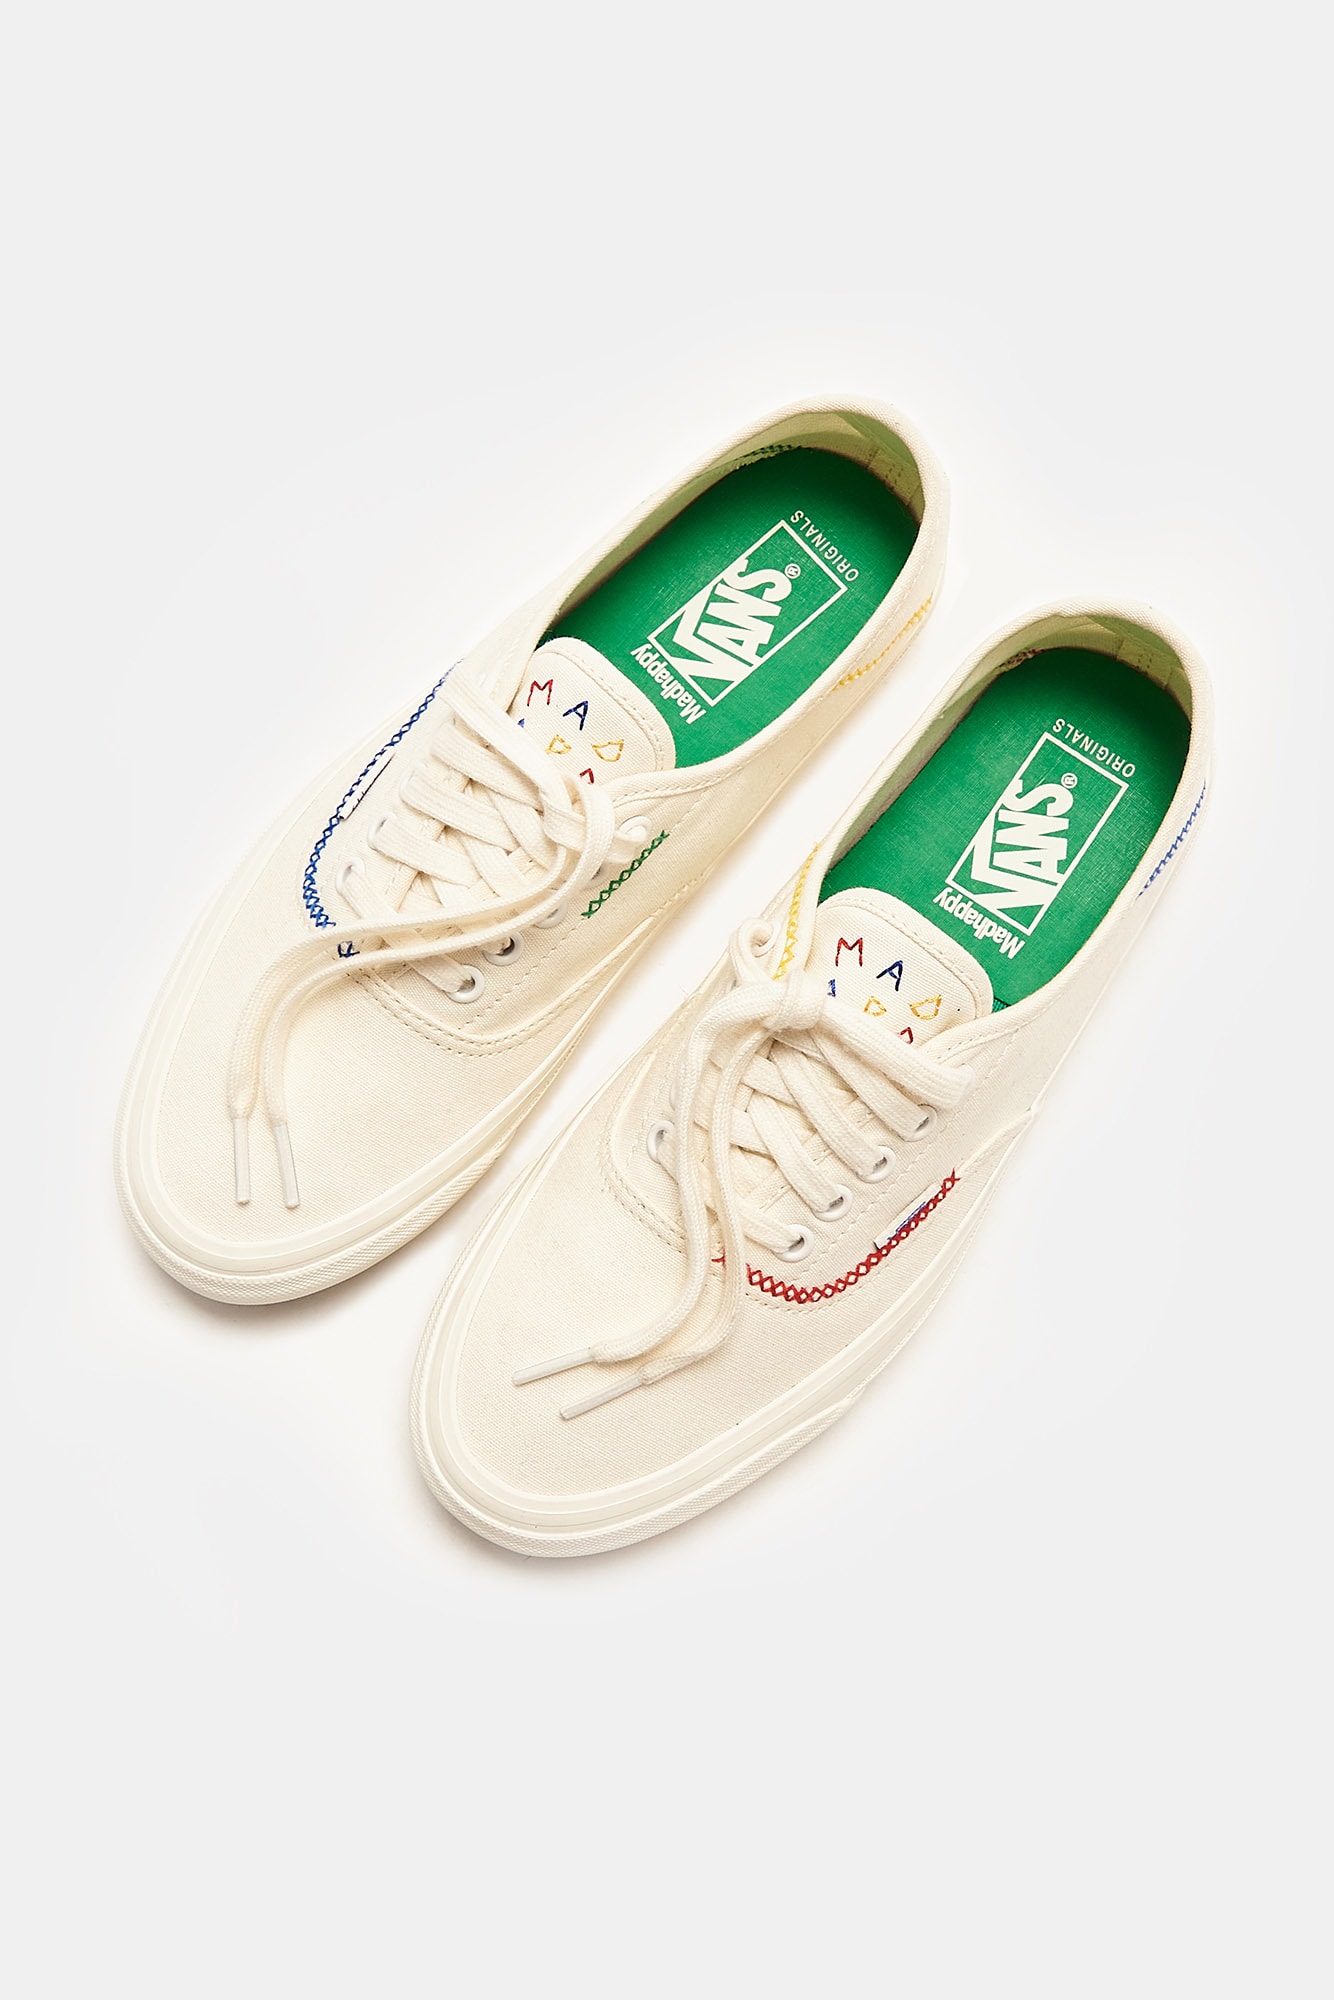 Vans x Madhappy OG Style 43 LX Collaboration Footwear Lifestyle Brand